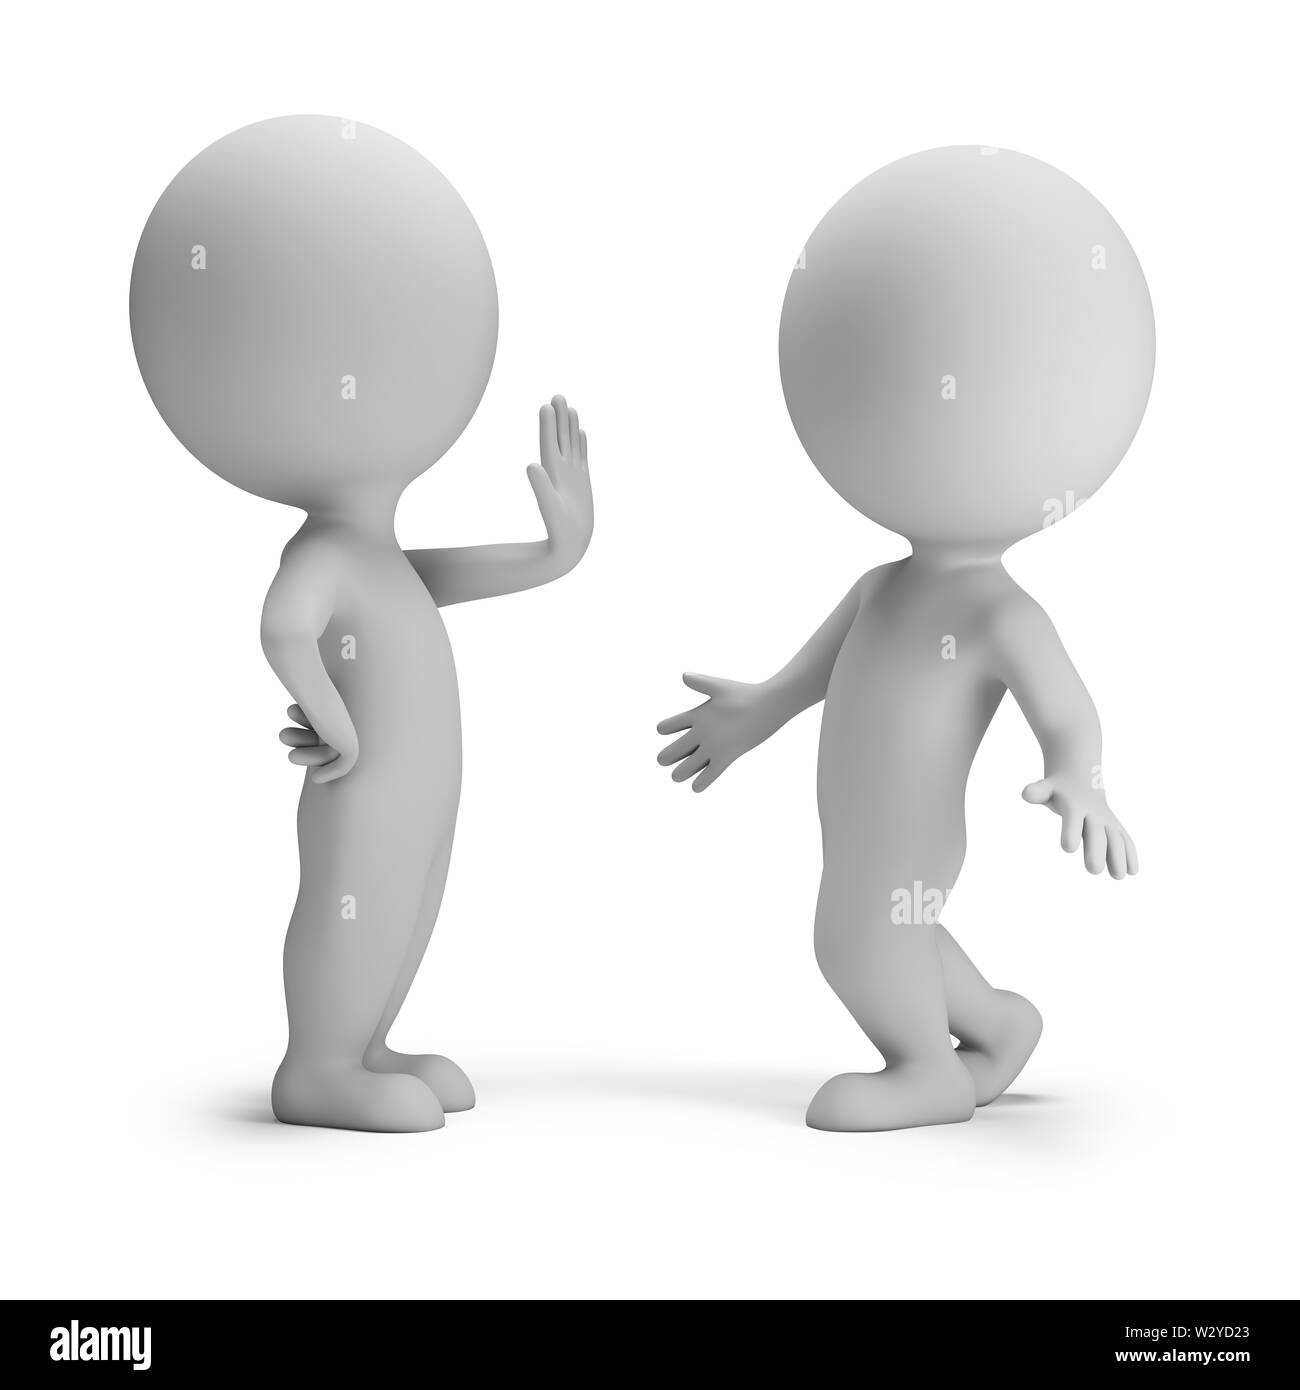 3d small people in stopping pose. 3d image. White background. Stock Photo